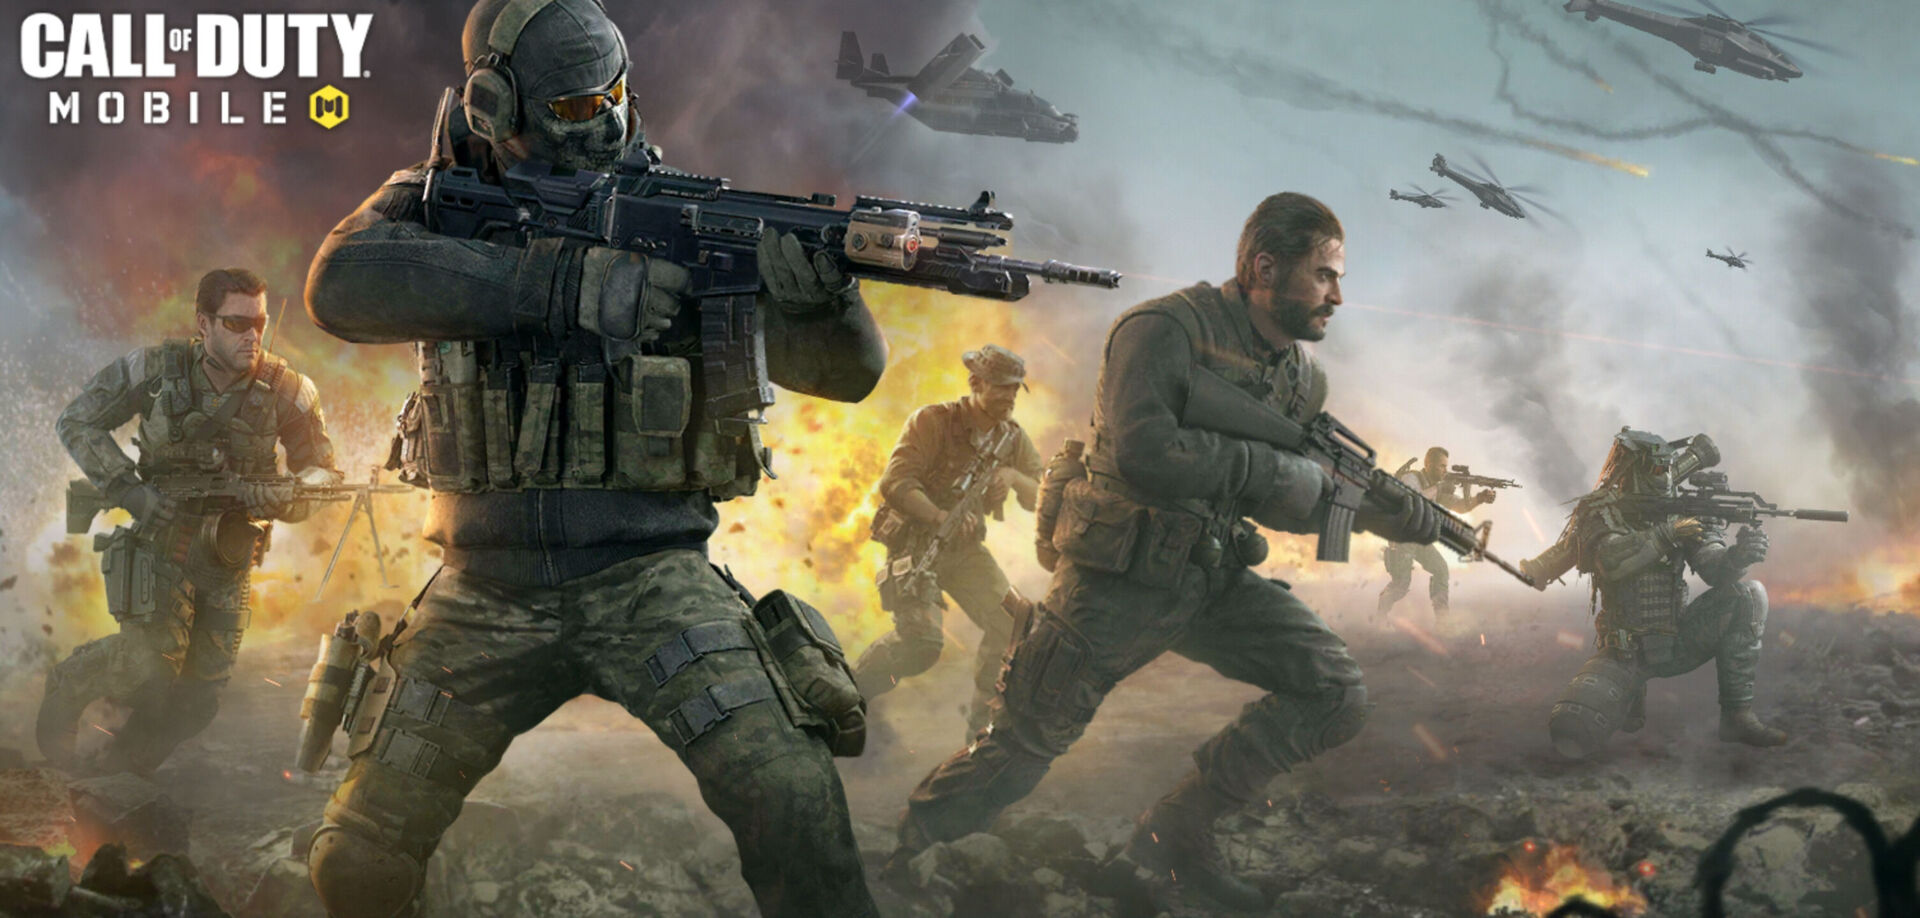 Call of Duty: Mobile won big in the Google Play apps of the year awards.